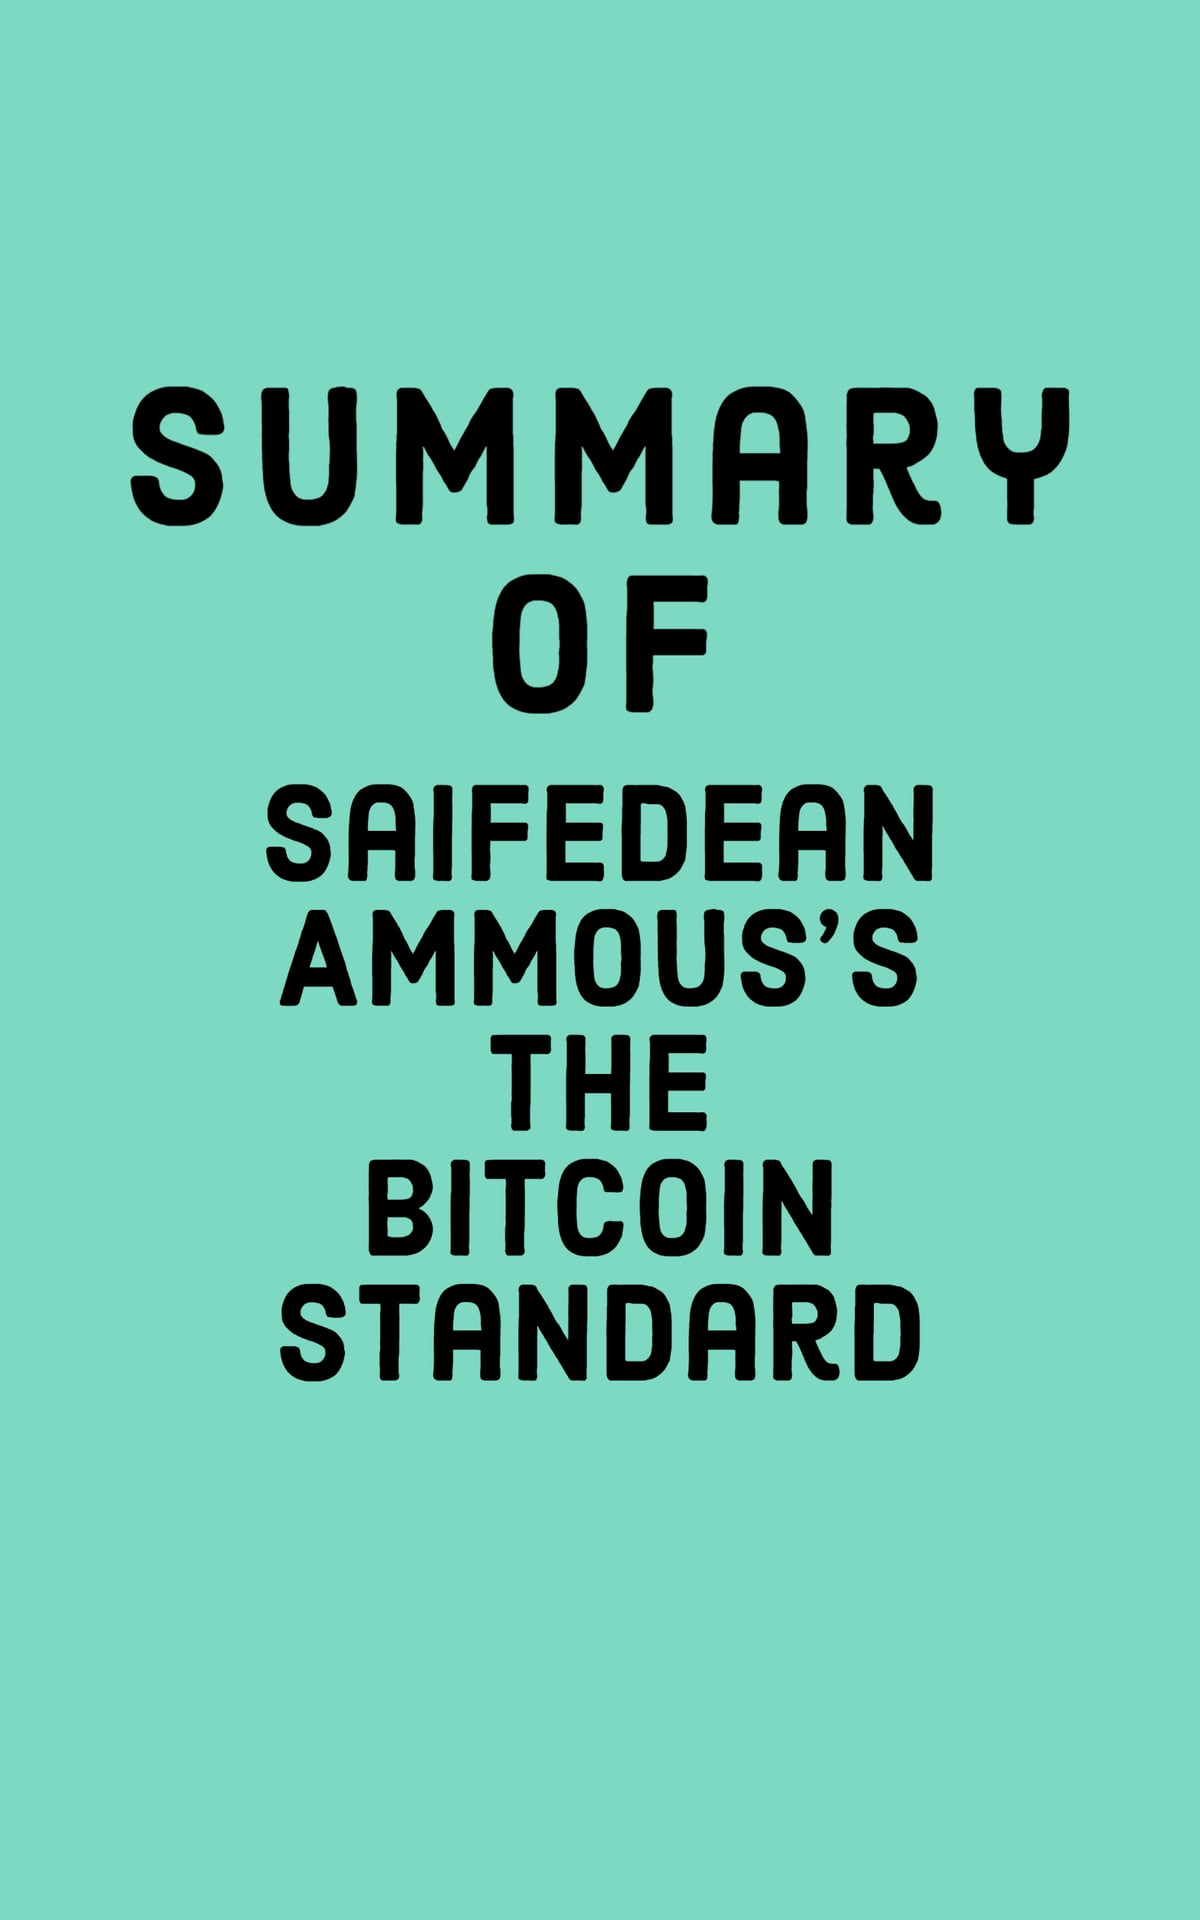 Summary of Saifedean Ammous's The Bitcoin Standard by Slingshot Books - Audiobook - family-gadgets.ru